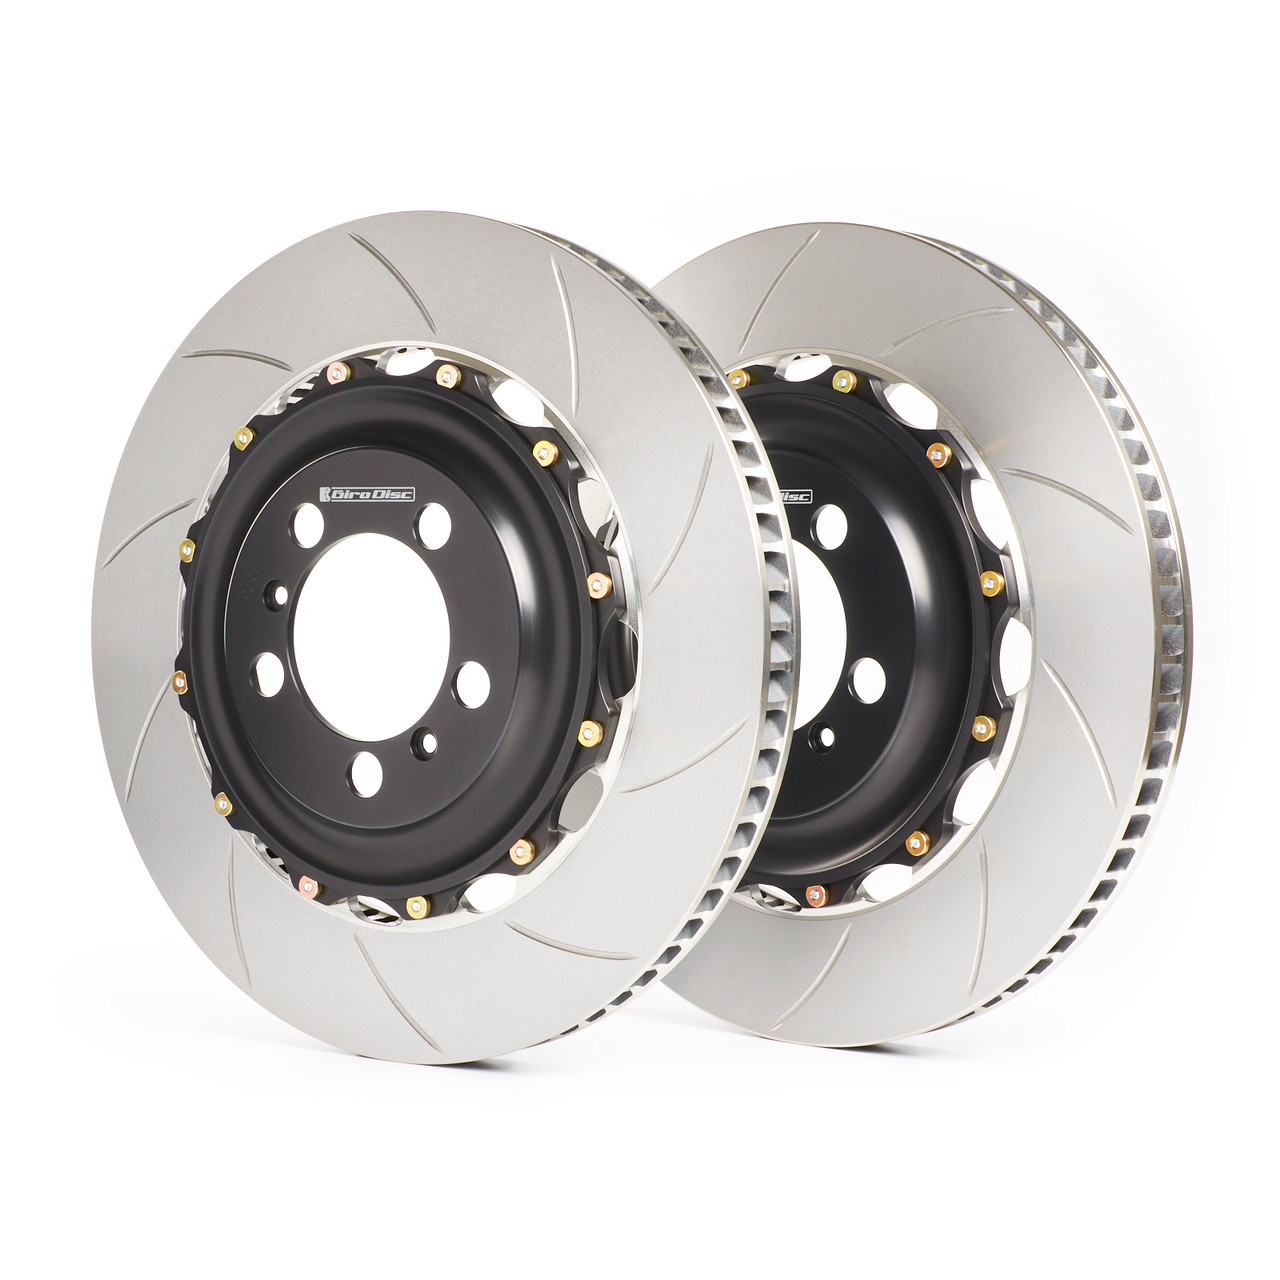 GiroDisc BMW F8X M2/M3/M4 (w/AP/Essex BBK 372x36mm Rotors) 2-Piece Slotted Front Rotors - A1-194